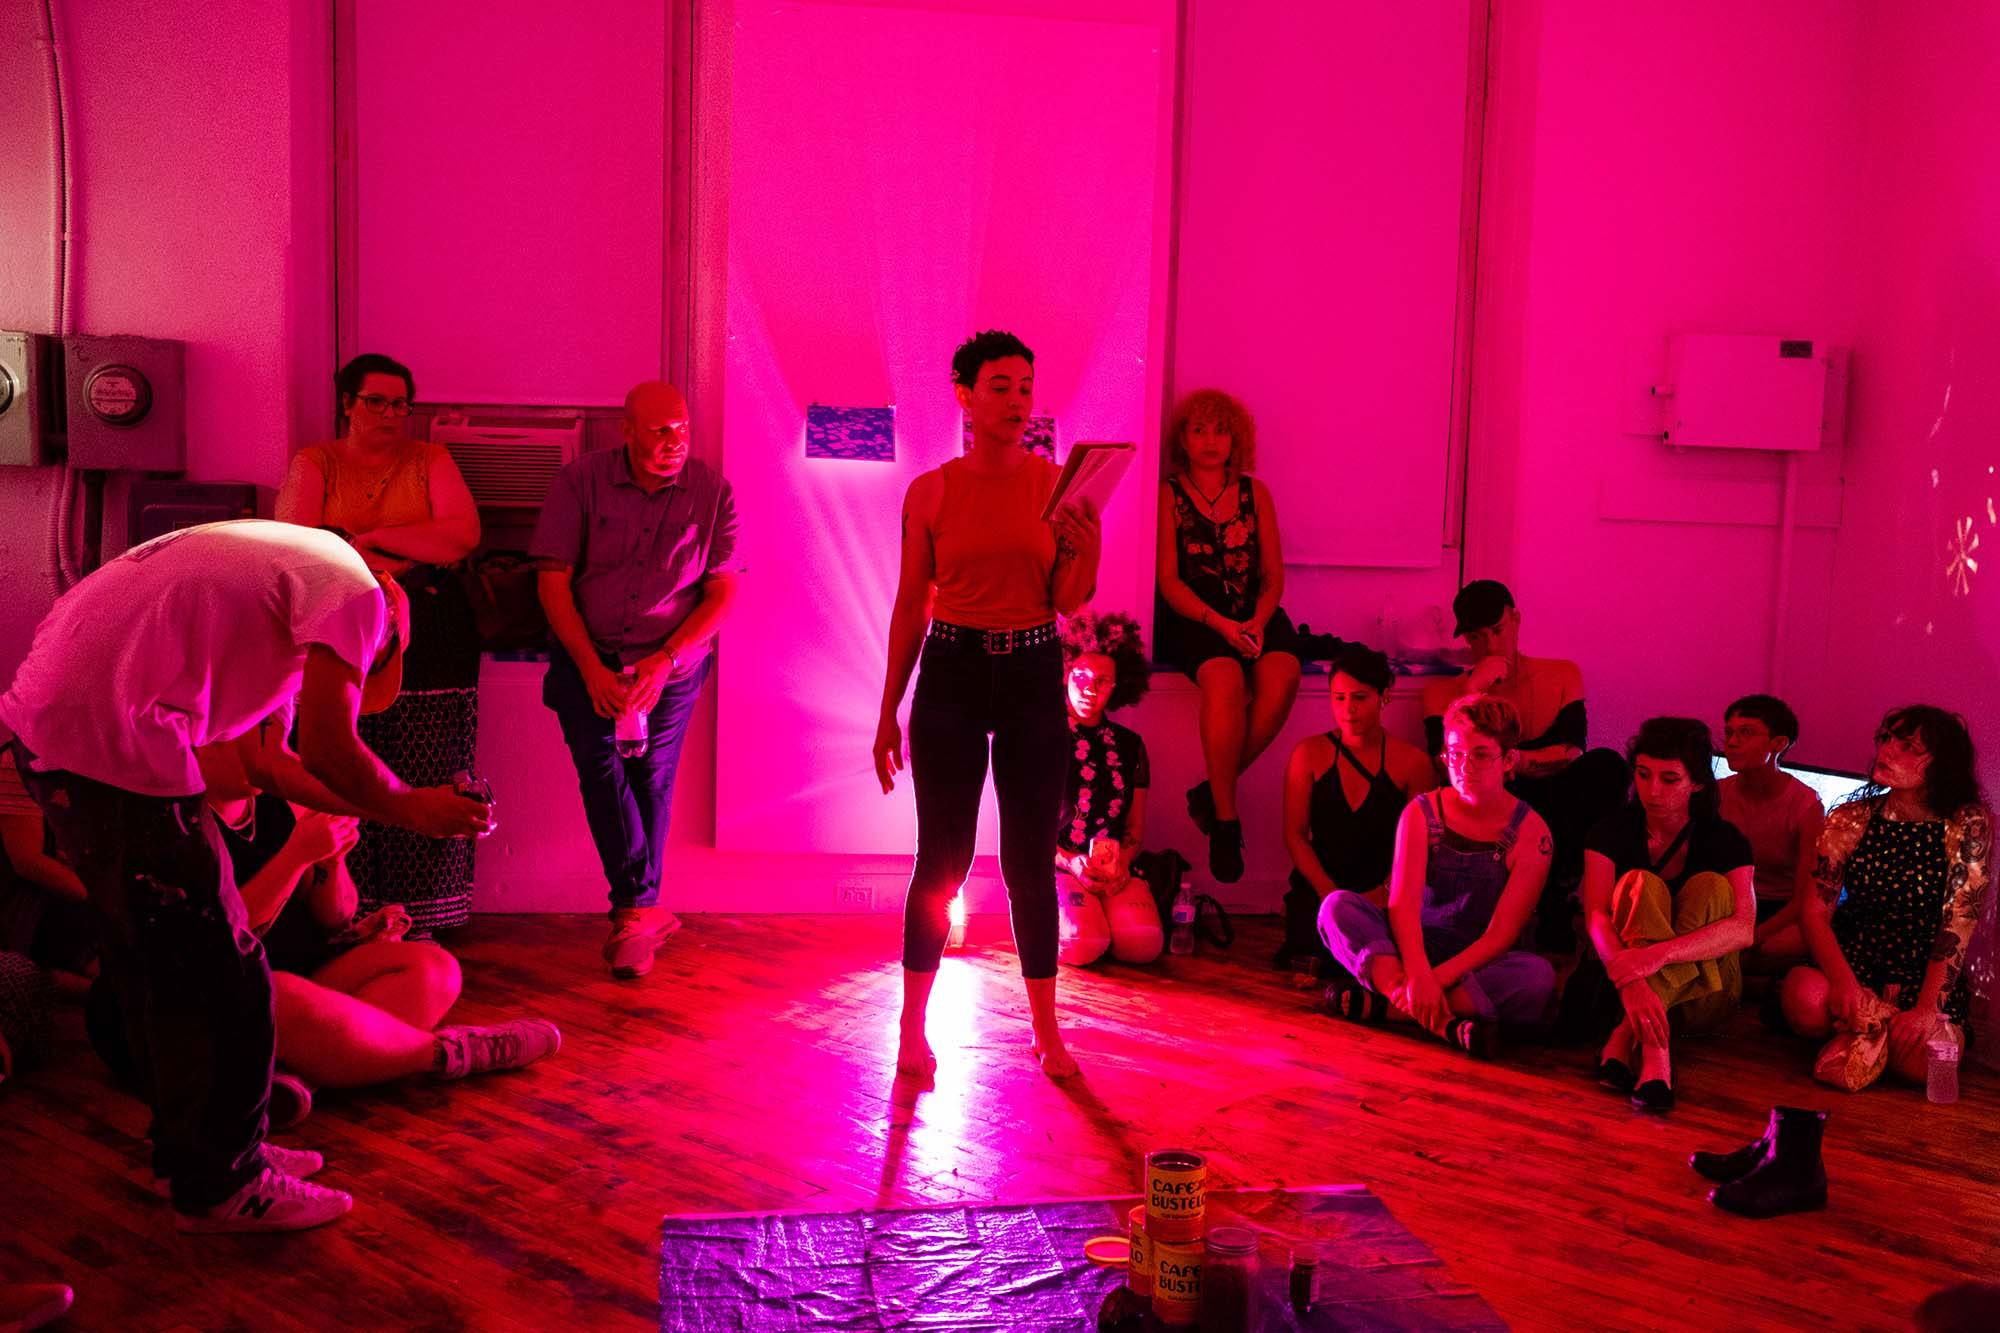 A pink lit room containing a central person reading with spectators seated around the periphery